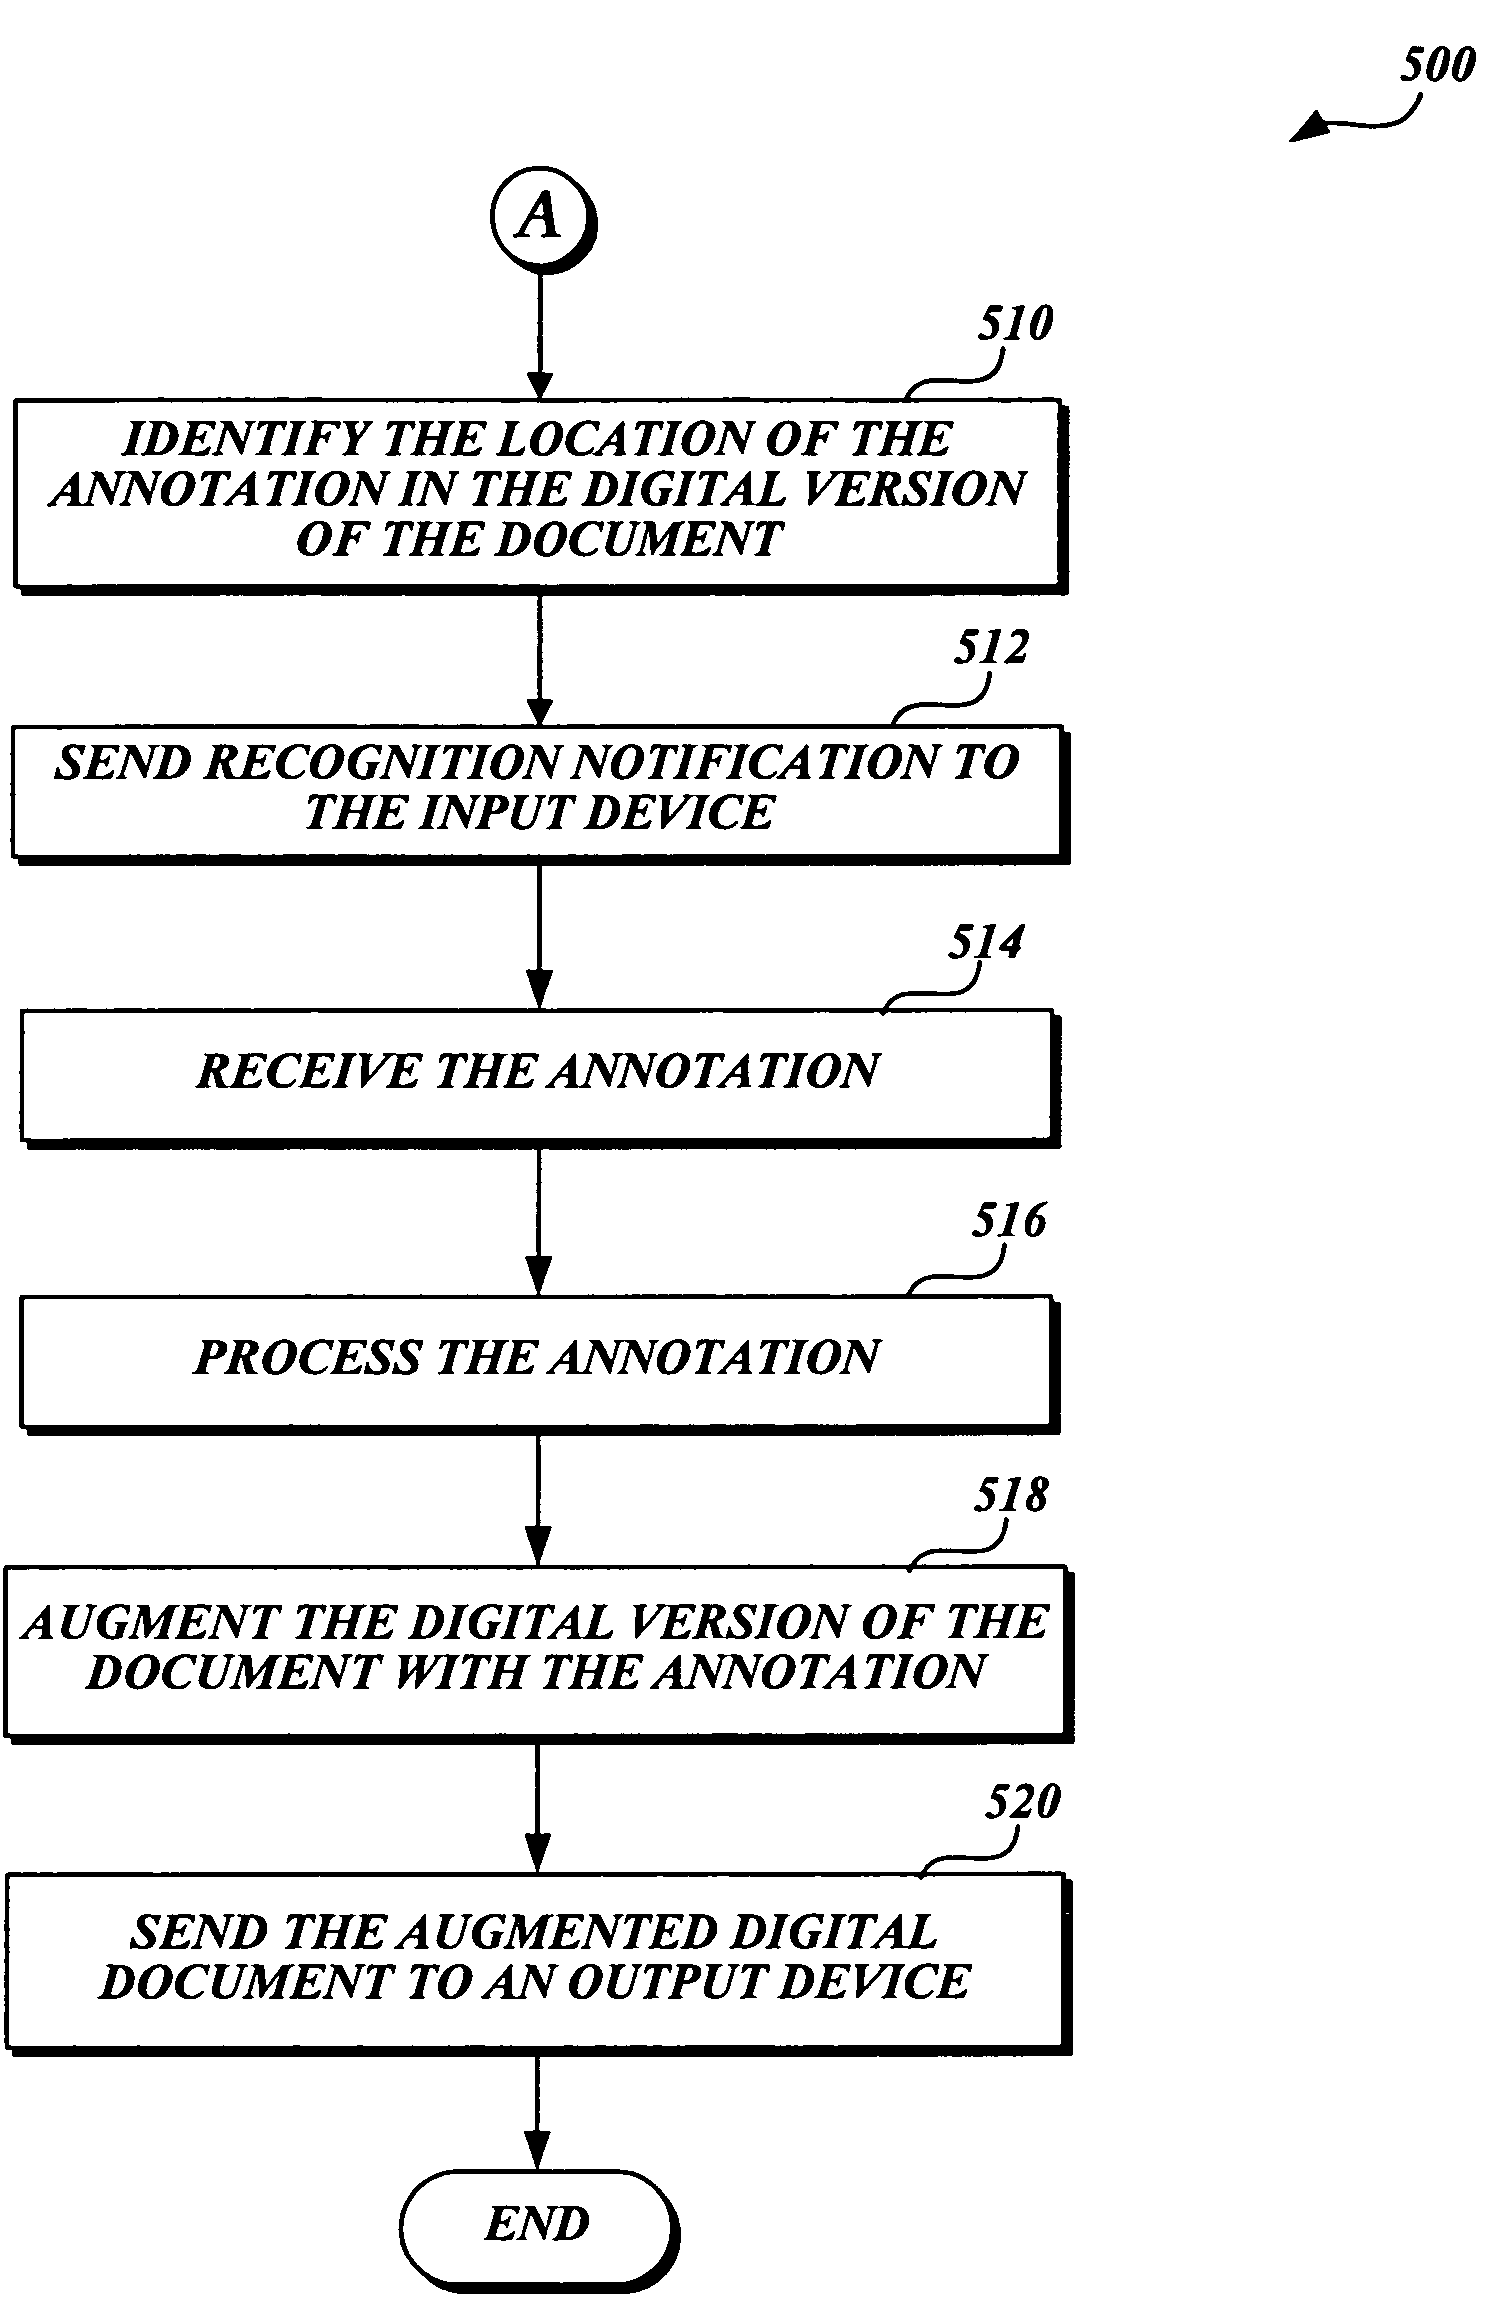 Electronic input device, system, and method using human-comprehensible content to automatically correlate an annotation of a paper document with a digital version of the document